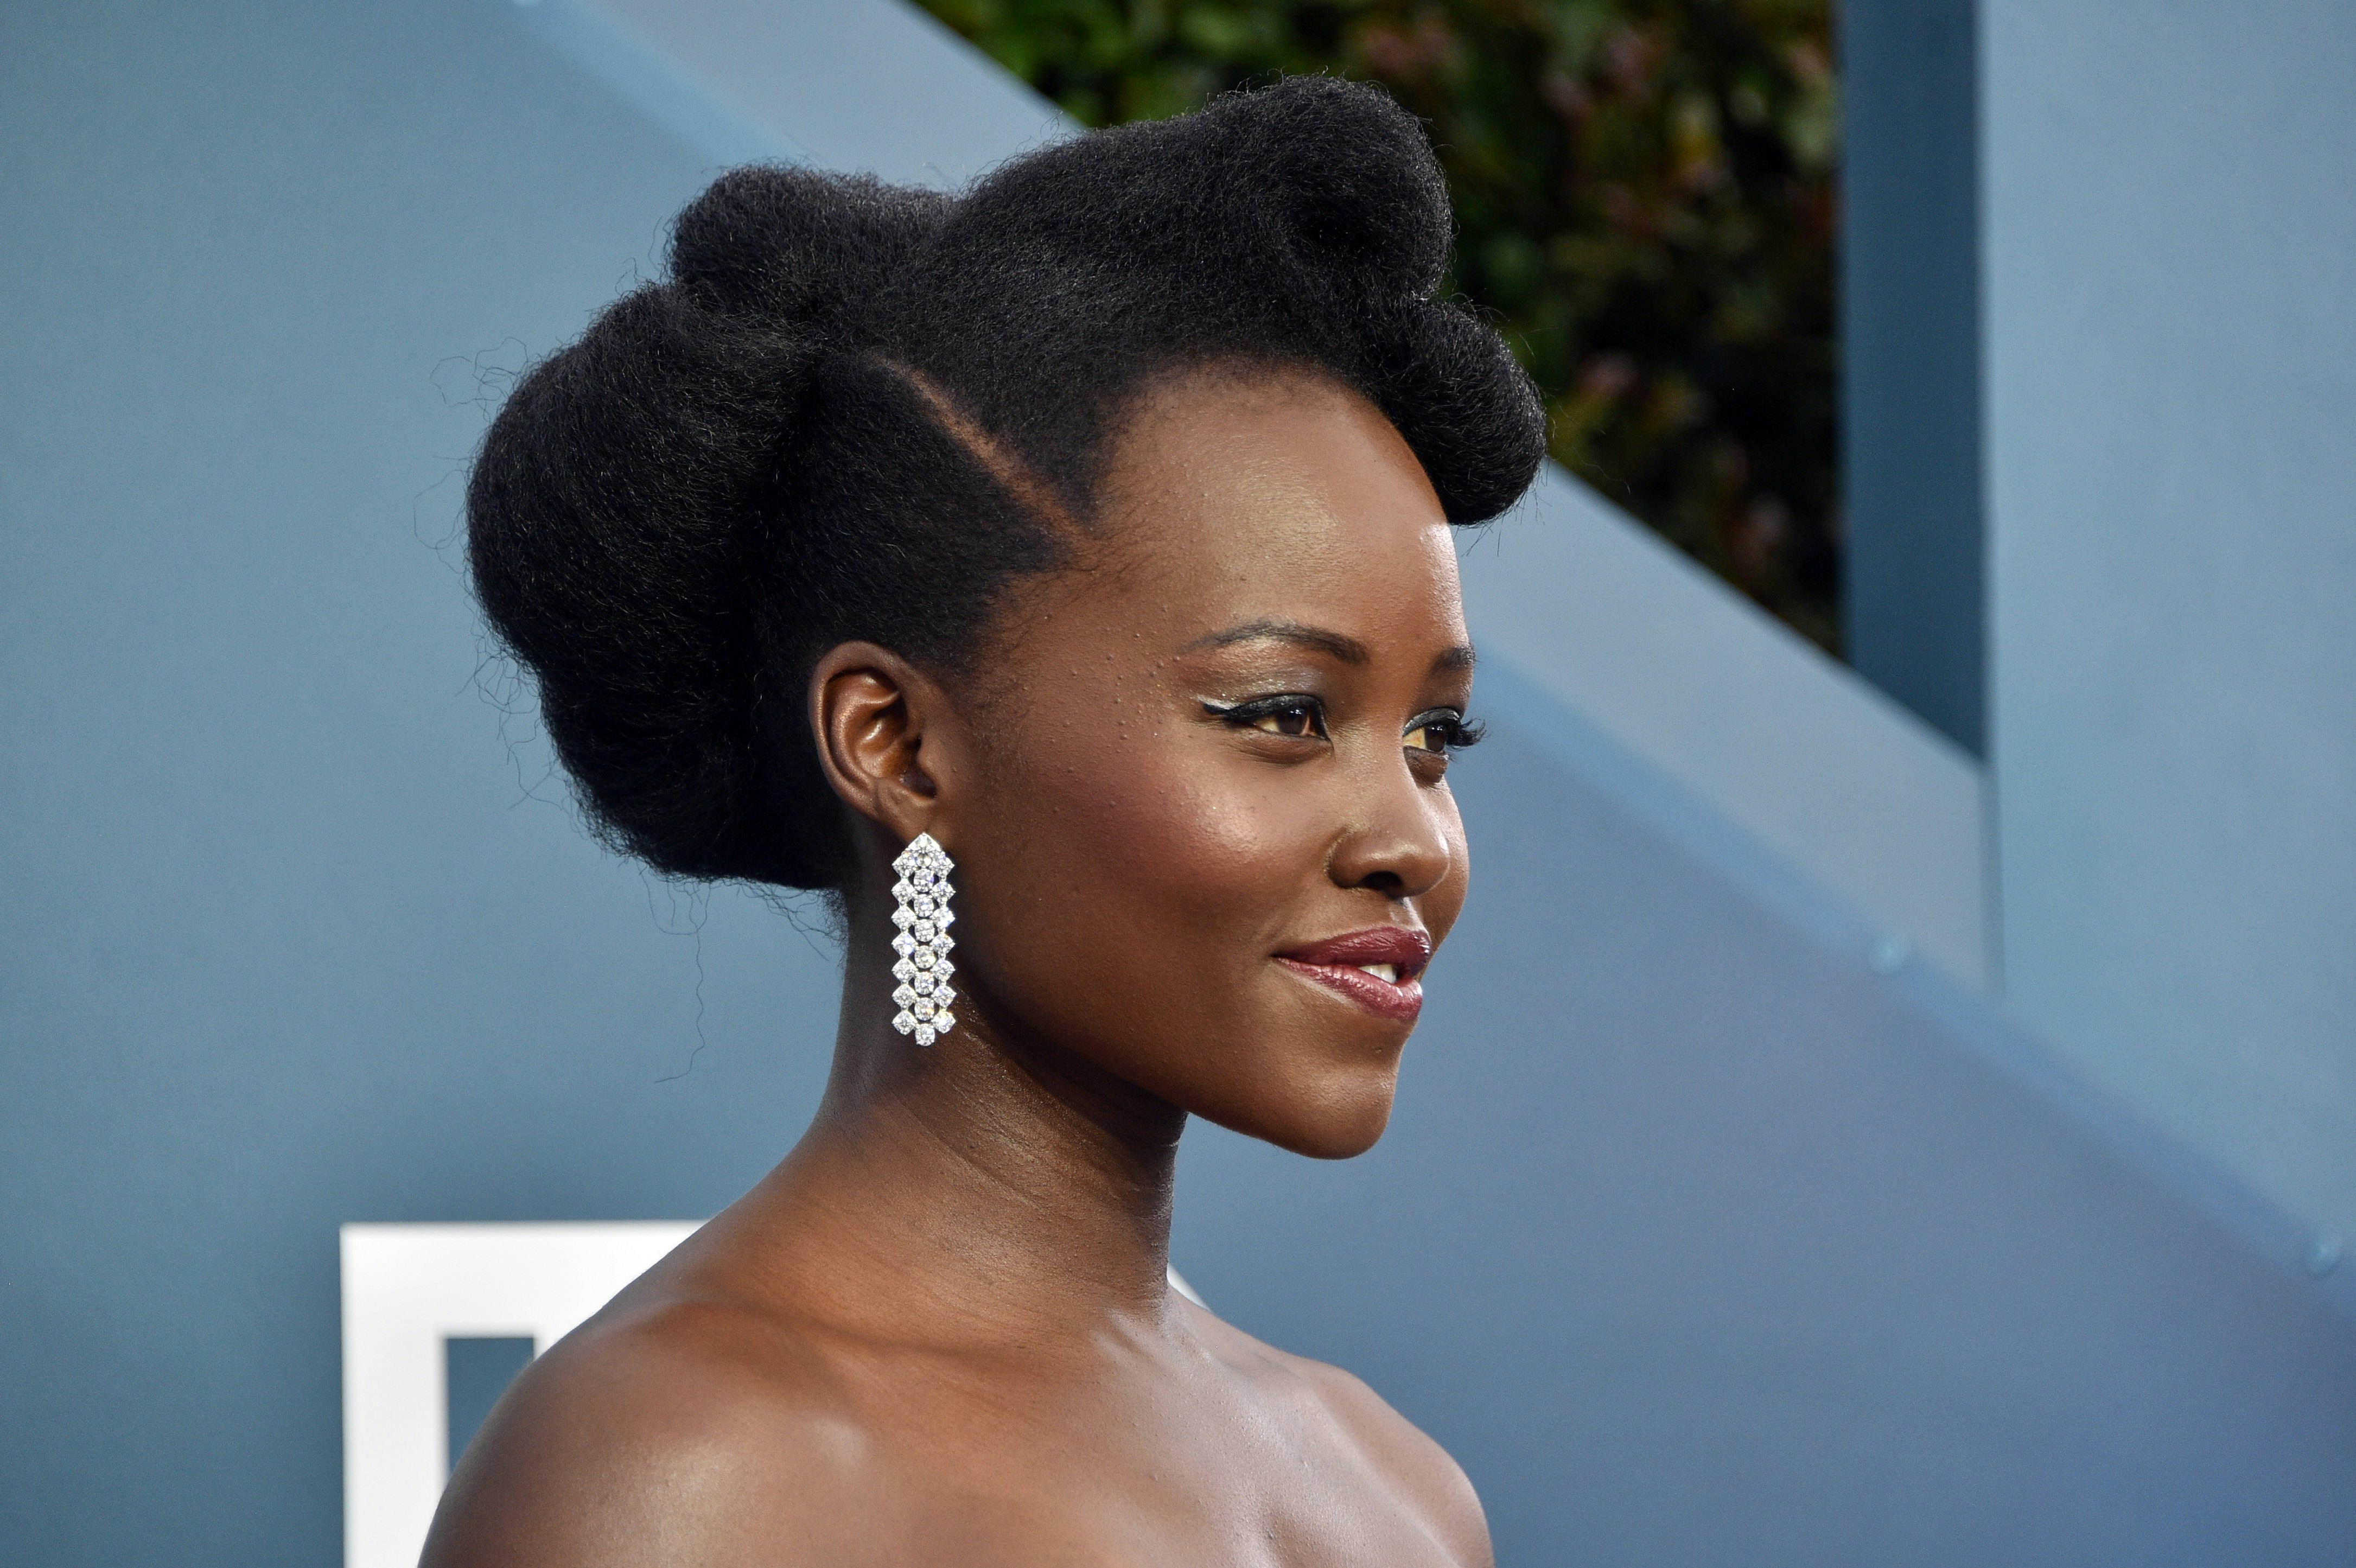 The 2020 Sag Awards Hairstyles That Are Anything But Basic